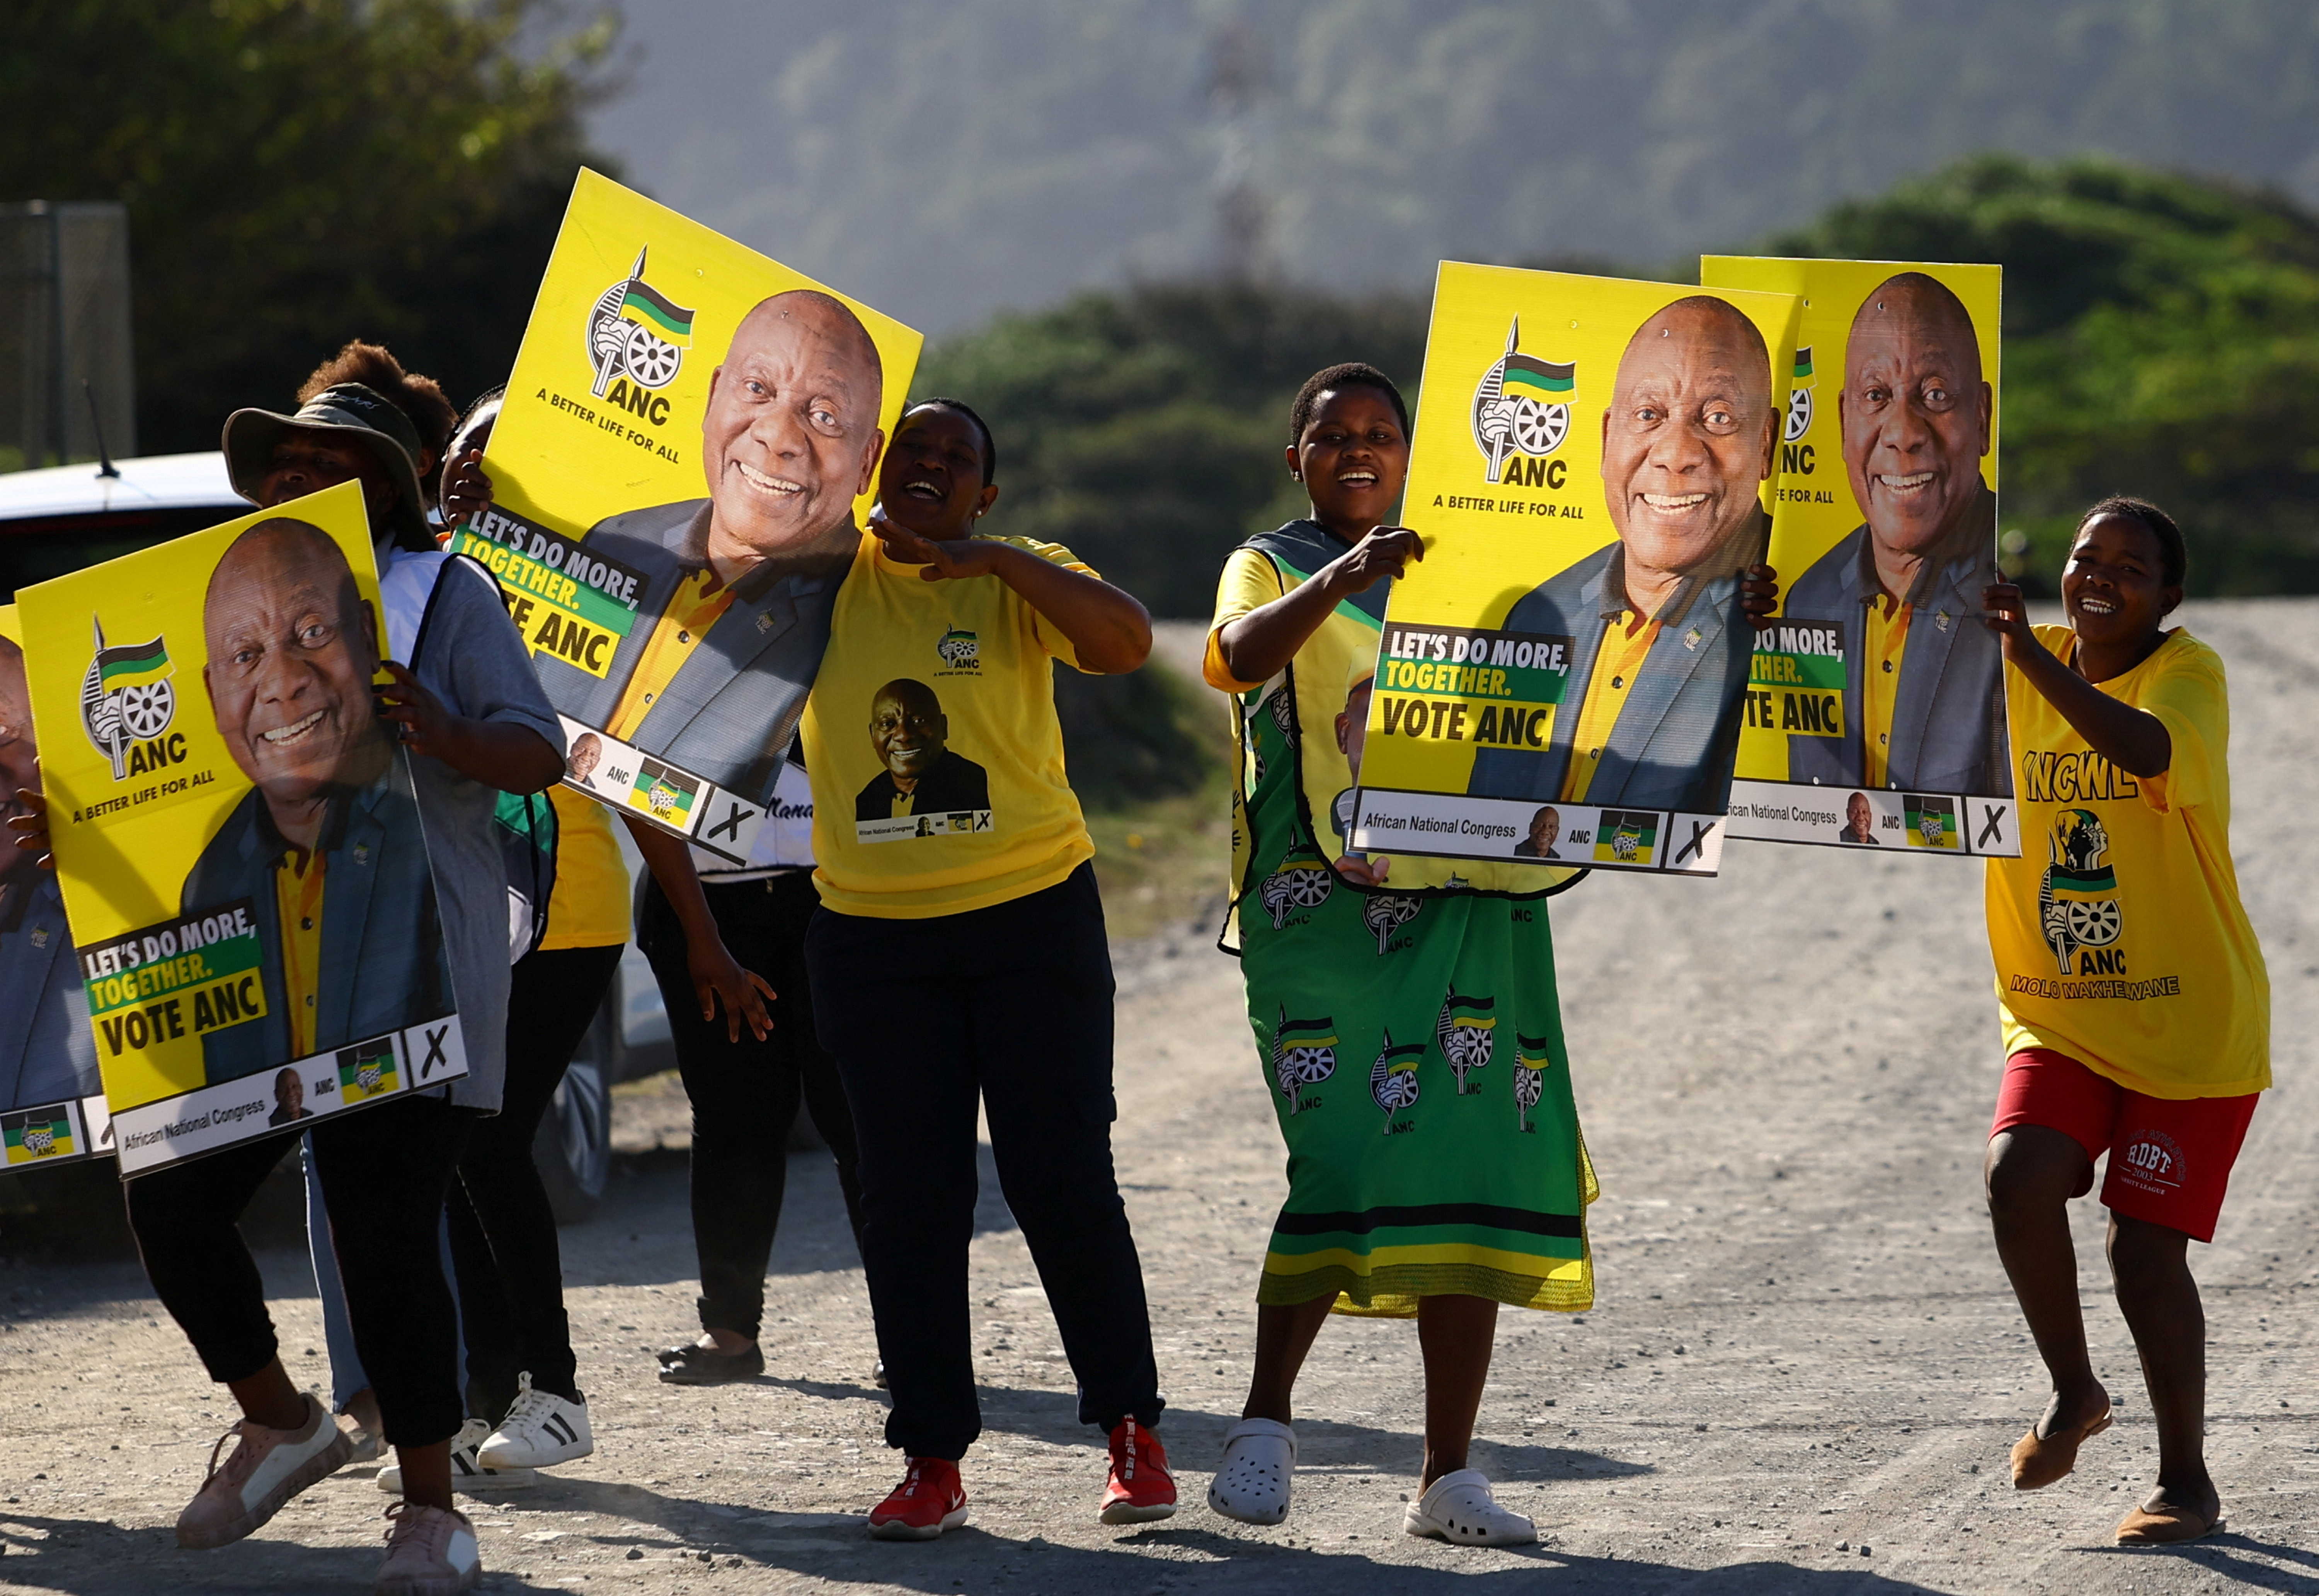 In rural South Africa, ANC legacy rivals youth frustration before poll